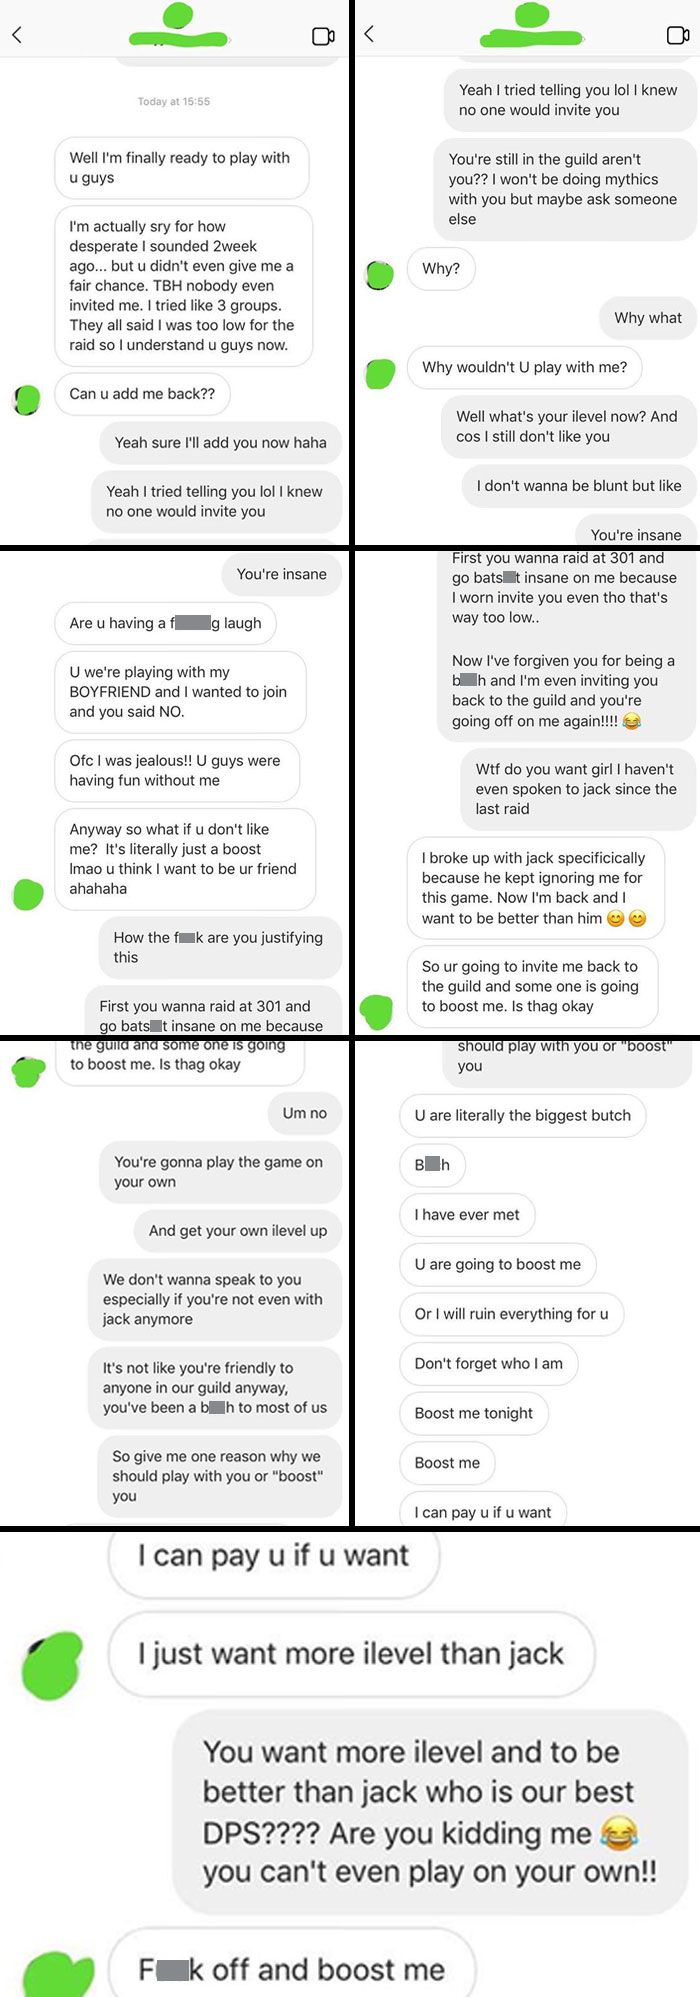 Jack's Ex-GF Is Back And Still Demanding Boosts On WOW